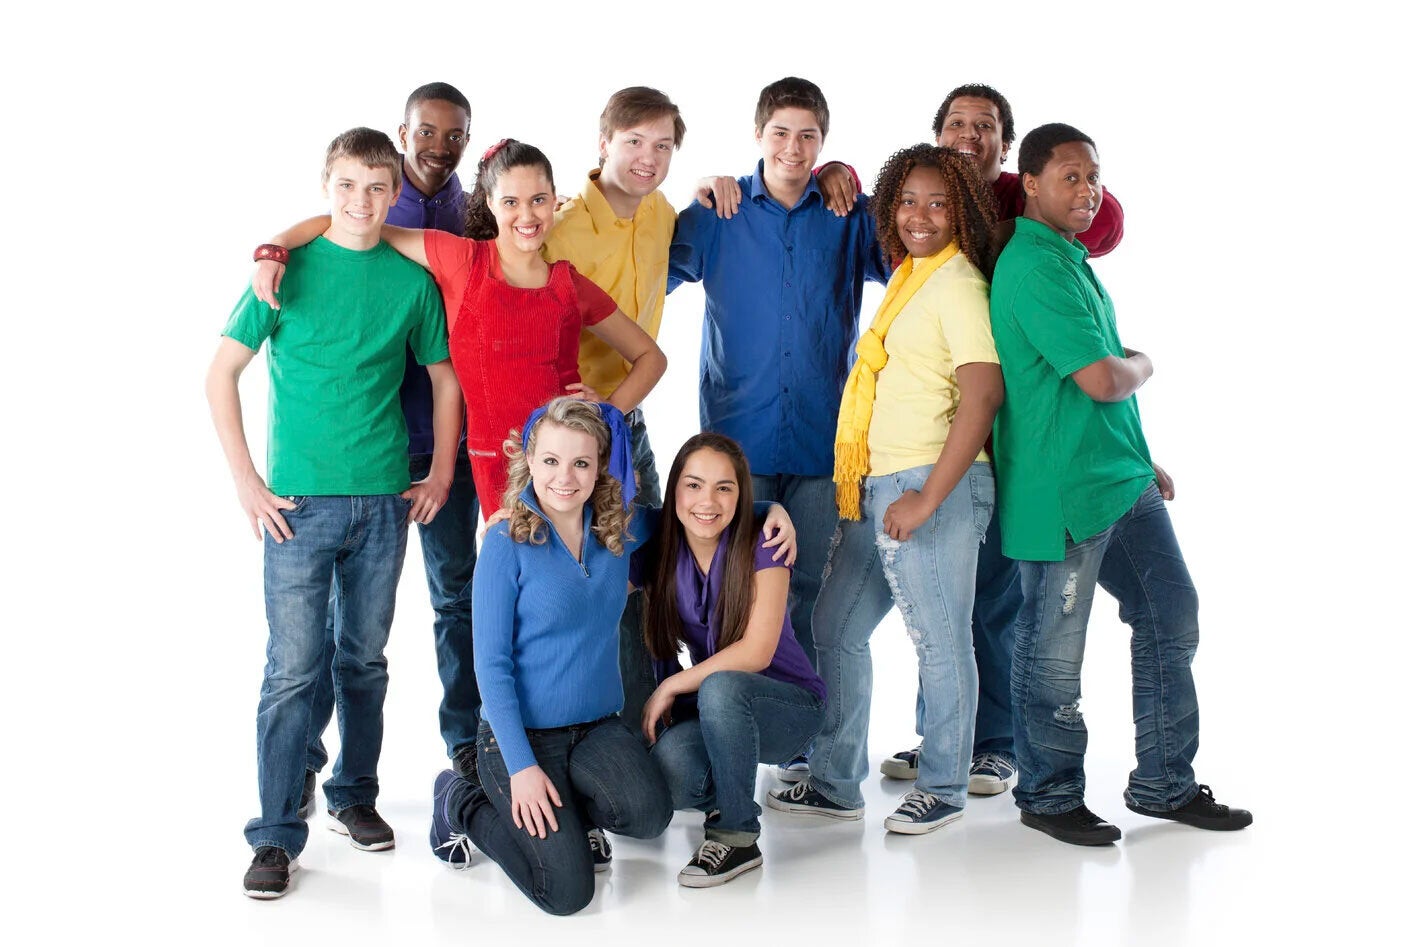 Group of adolescents of multiple ethnicities